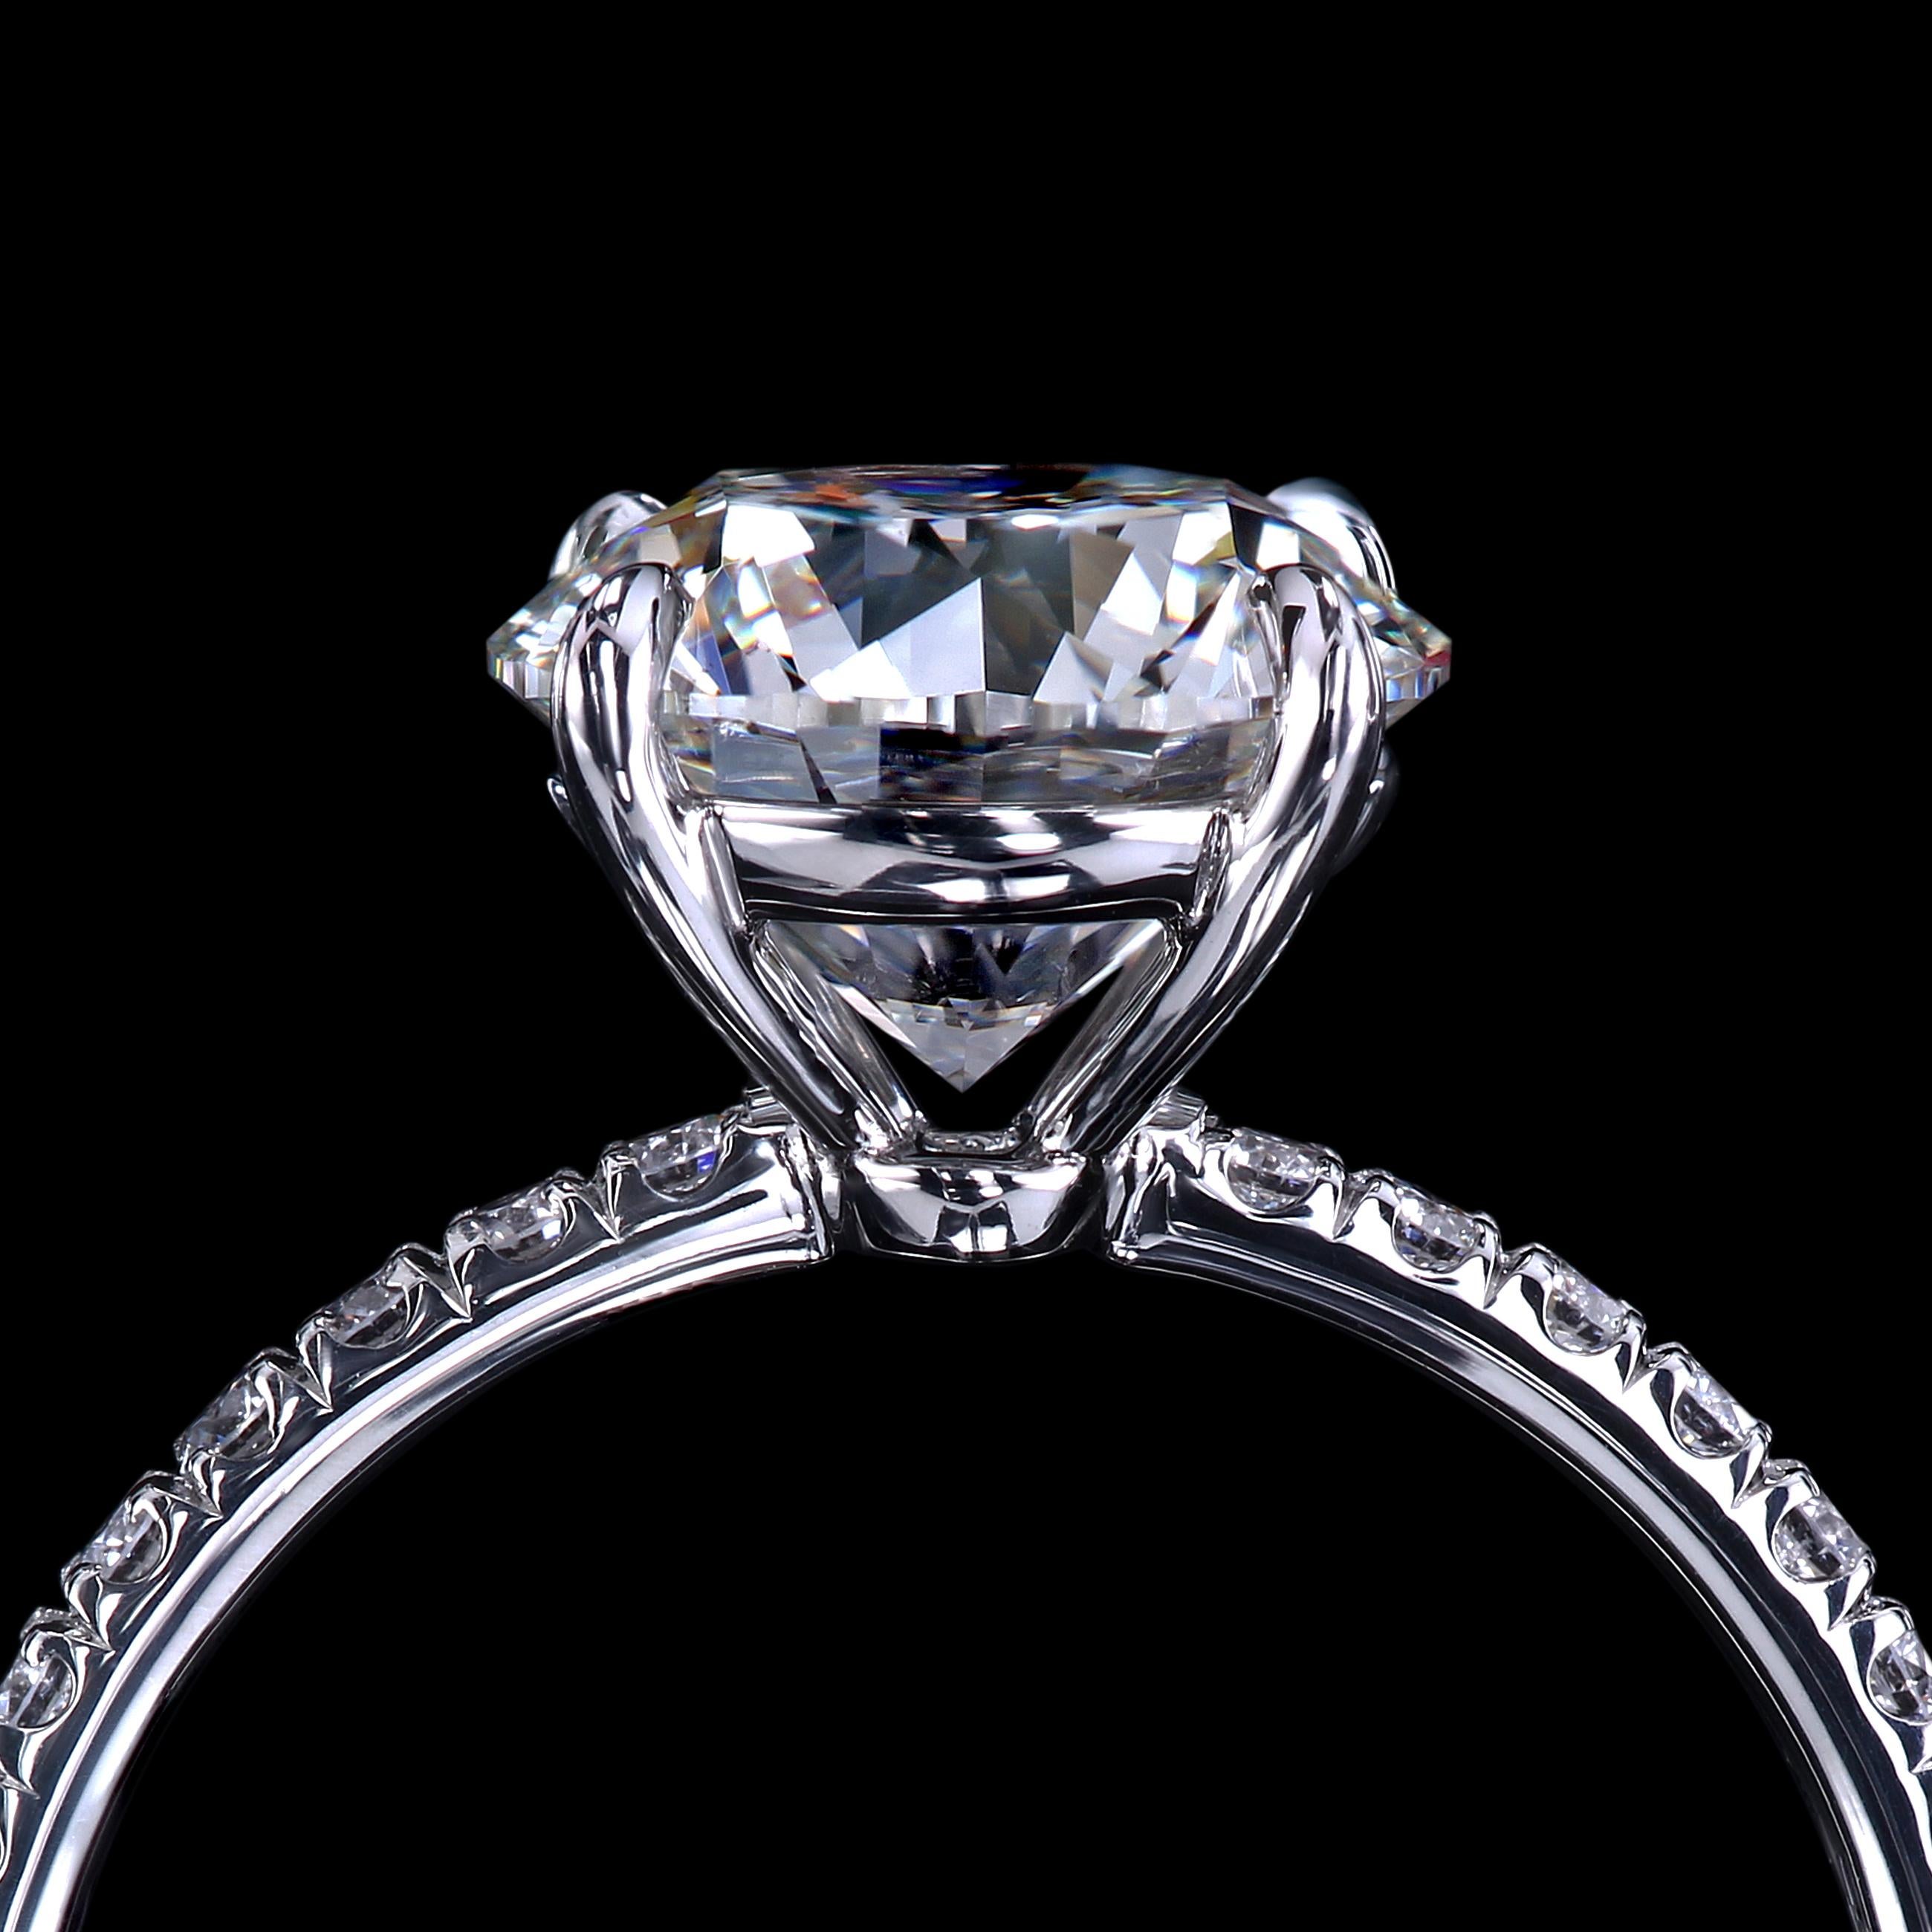 The perfect solitaire ring custom-crafted by hand. The shank is set with one row of micro pave. 
You can choose the width of the shank between 1.5 and 2.0 mm.

The lead time for project completion is approximately four weeks.

Custom made pieces are